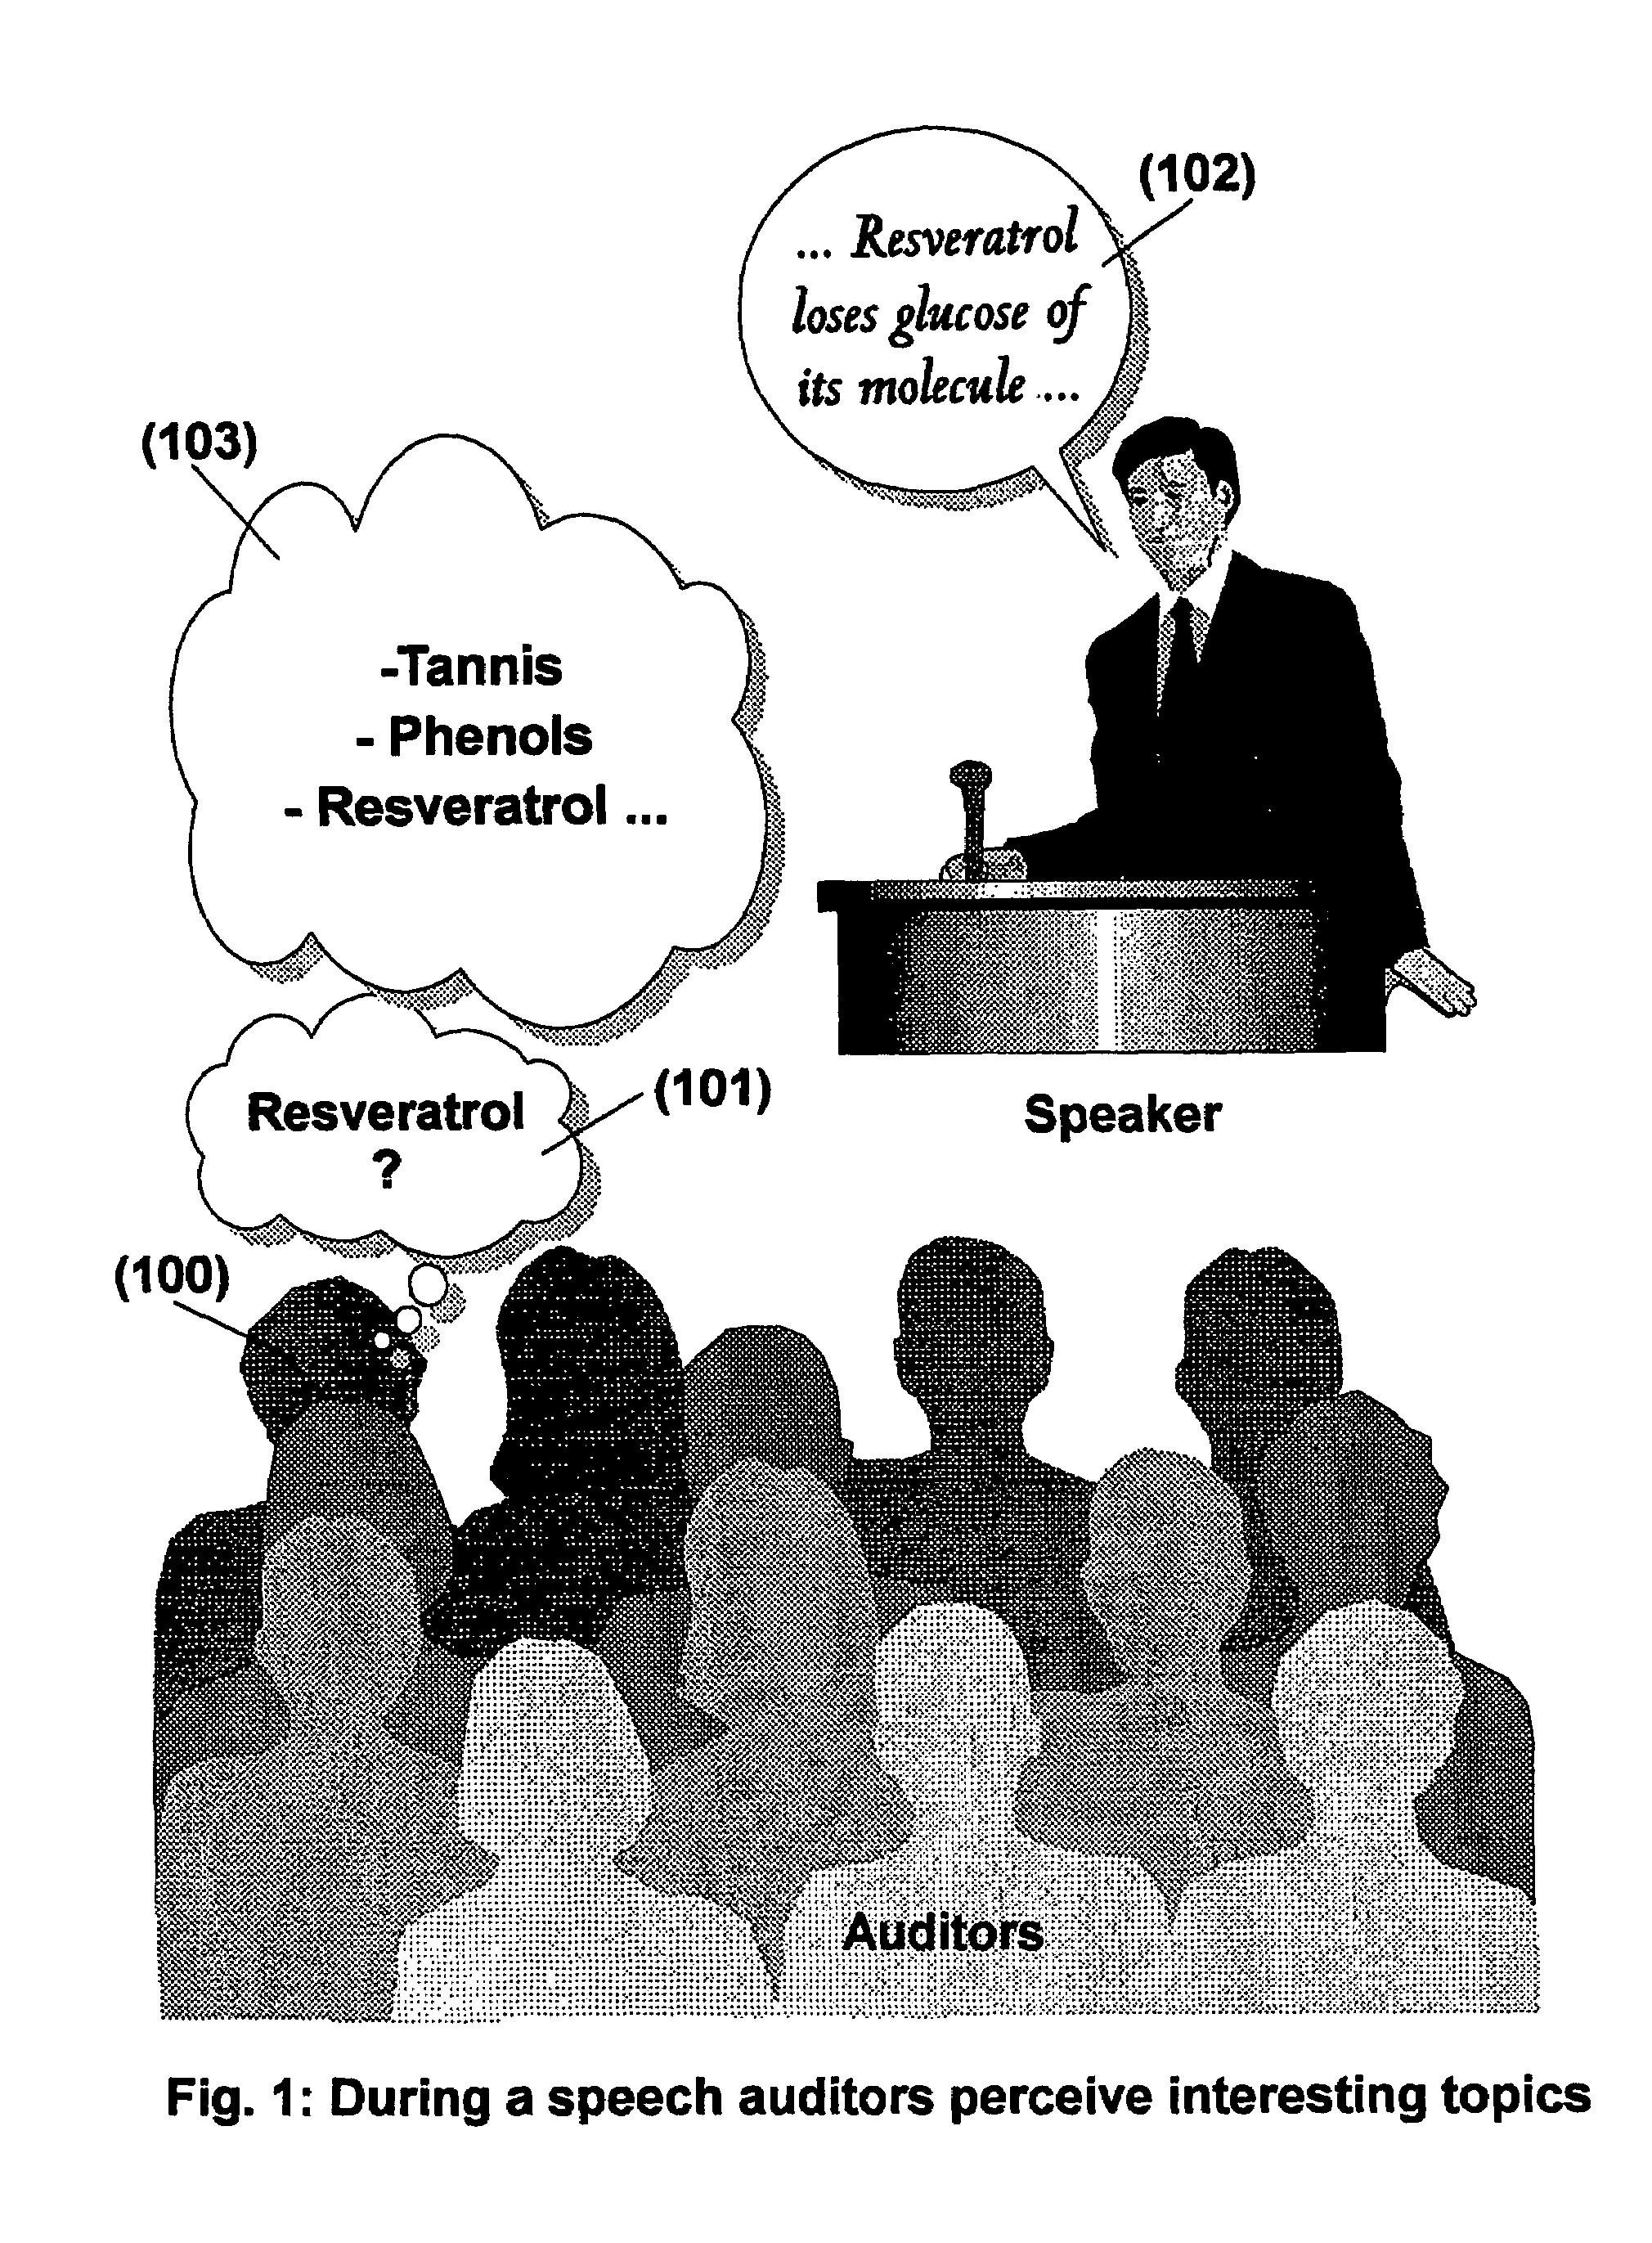 System and method for enhancing live speech with information accessed from the World Wide Web